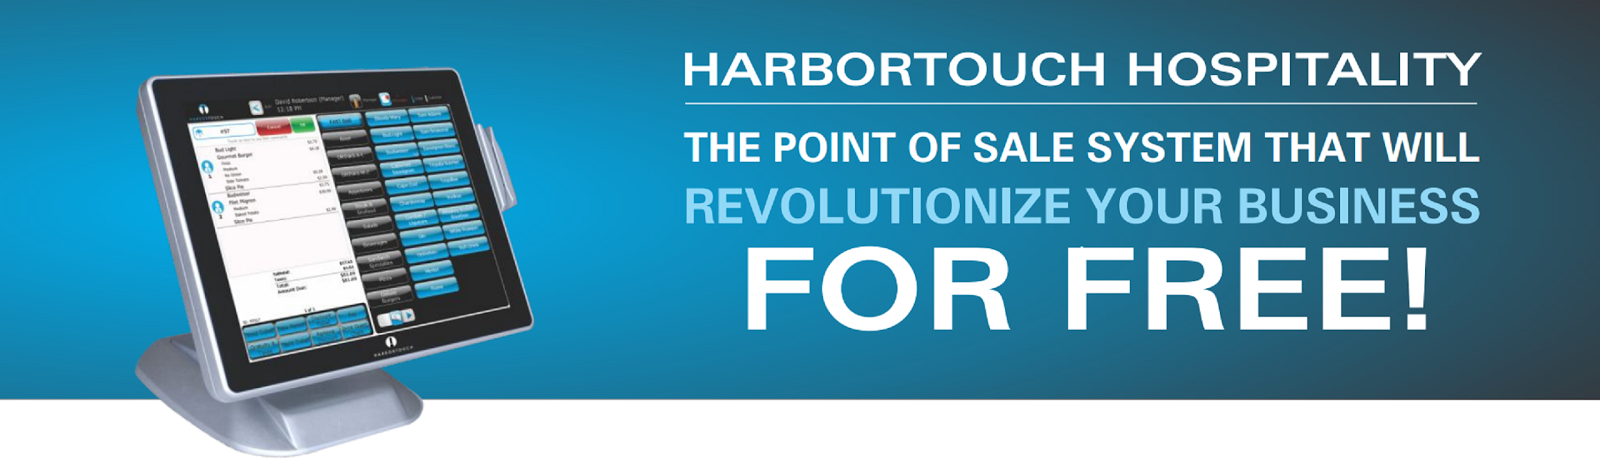 Harbortouch Free POS system